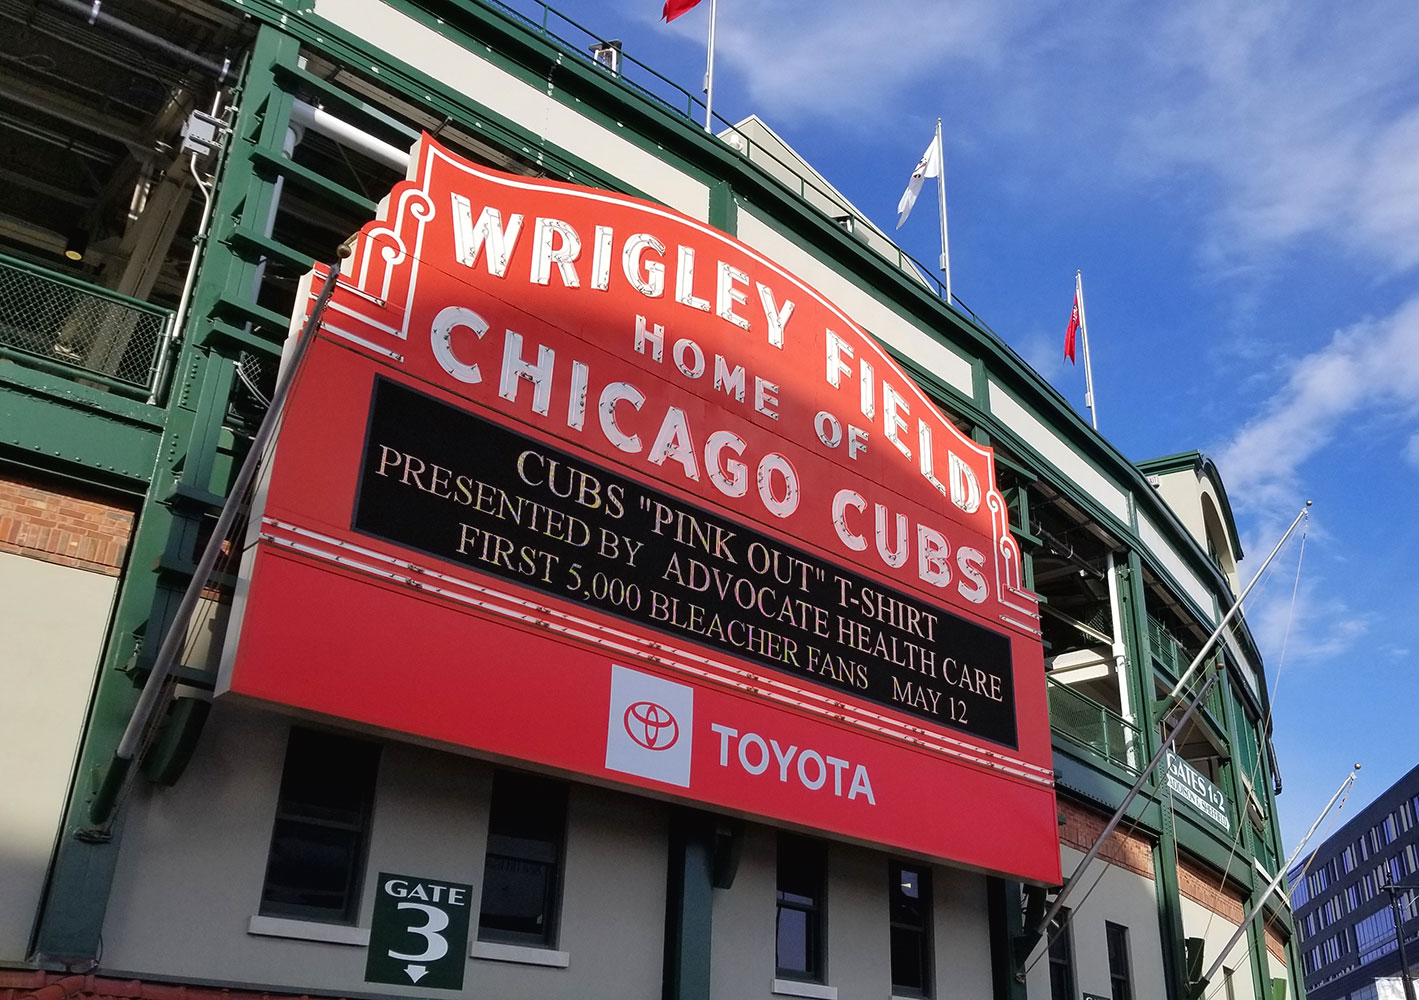 Wrigley Field adds new technology for security, concessions